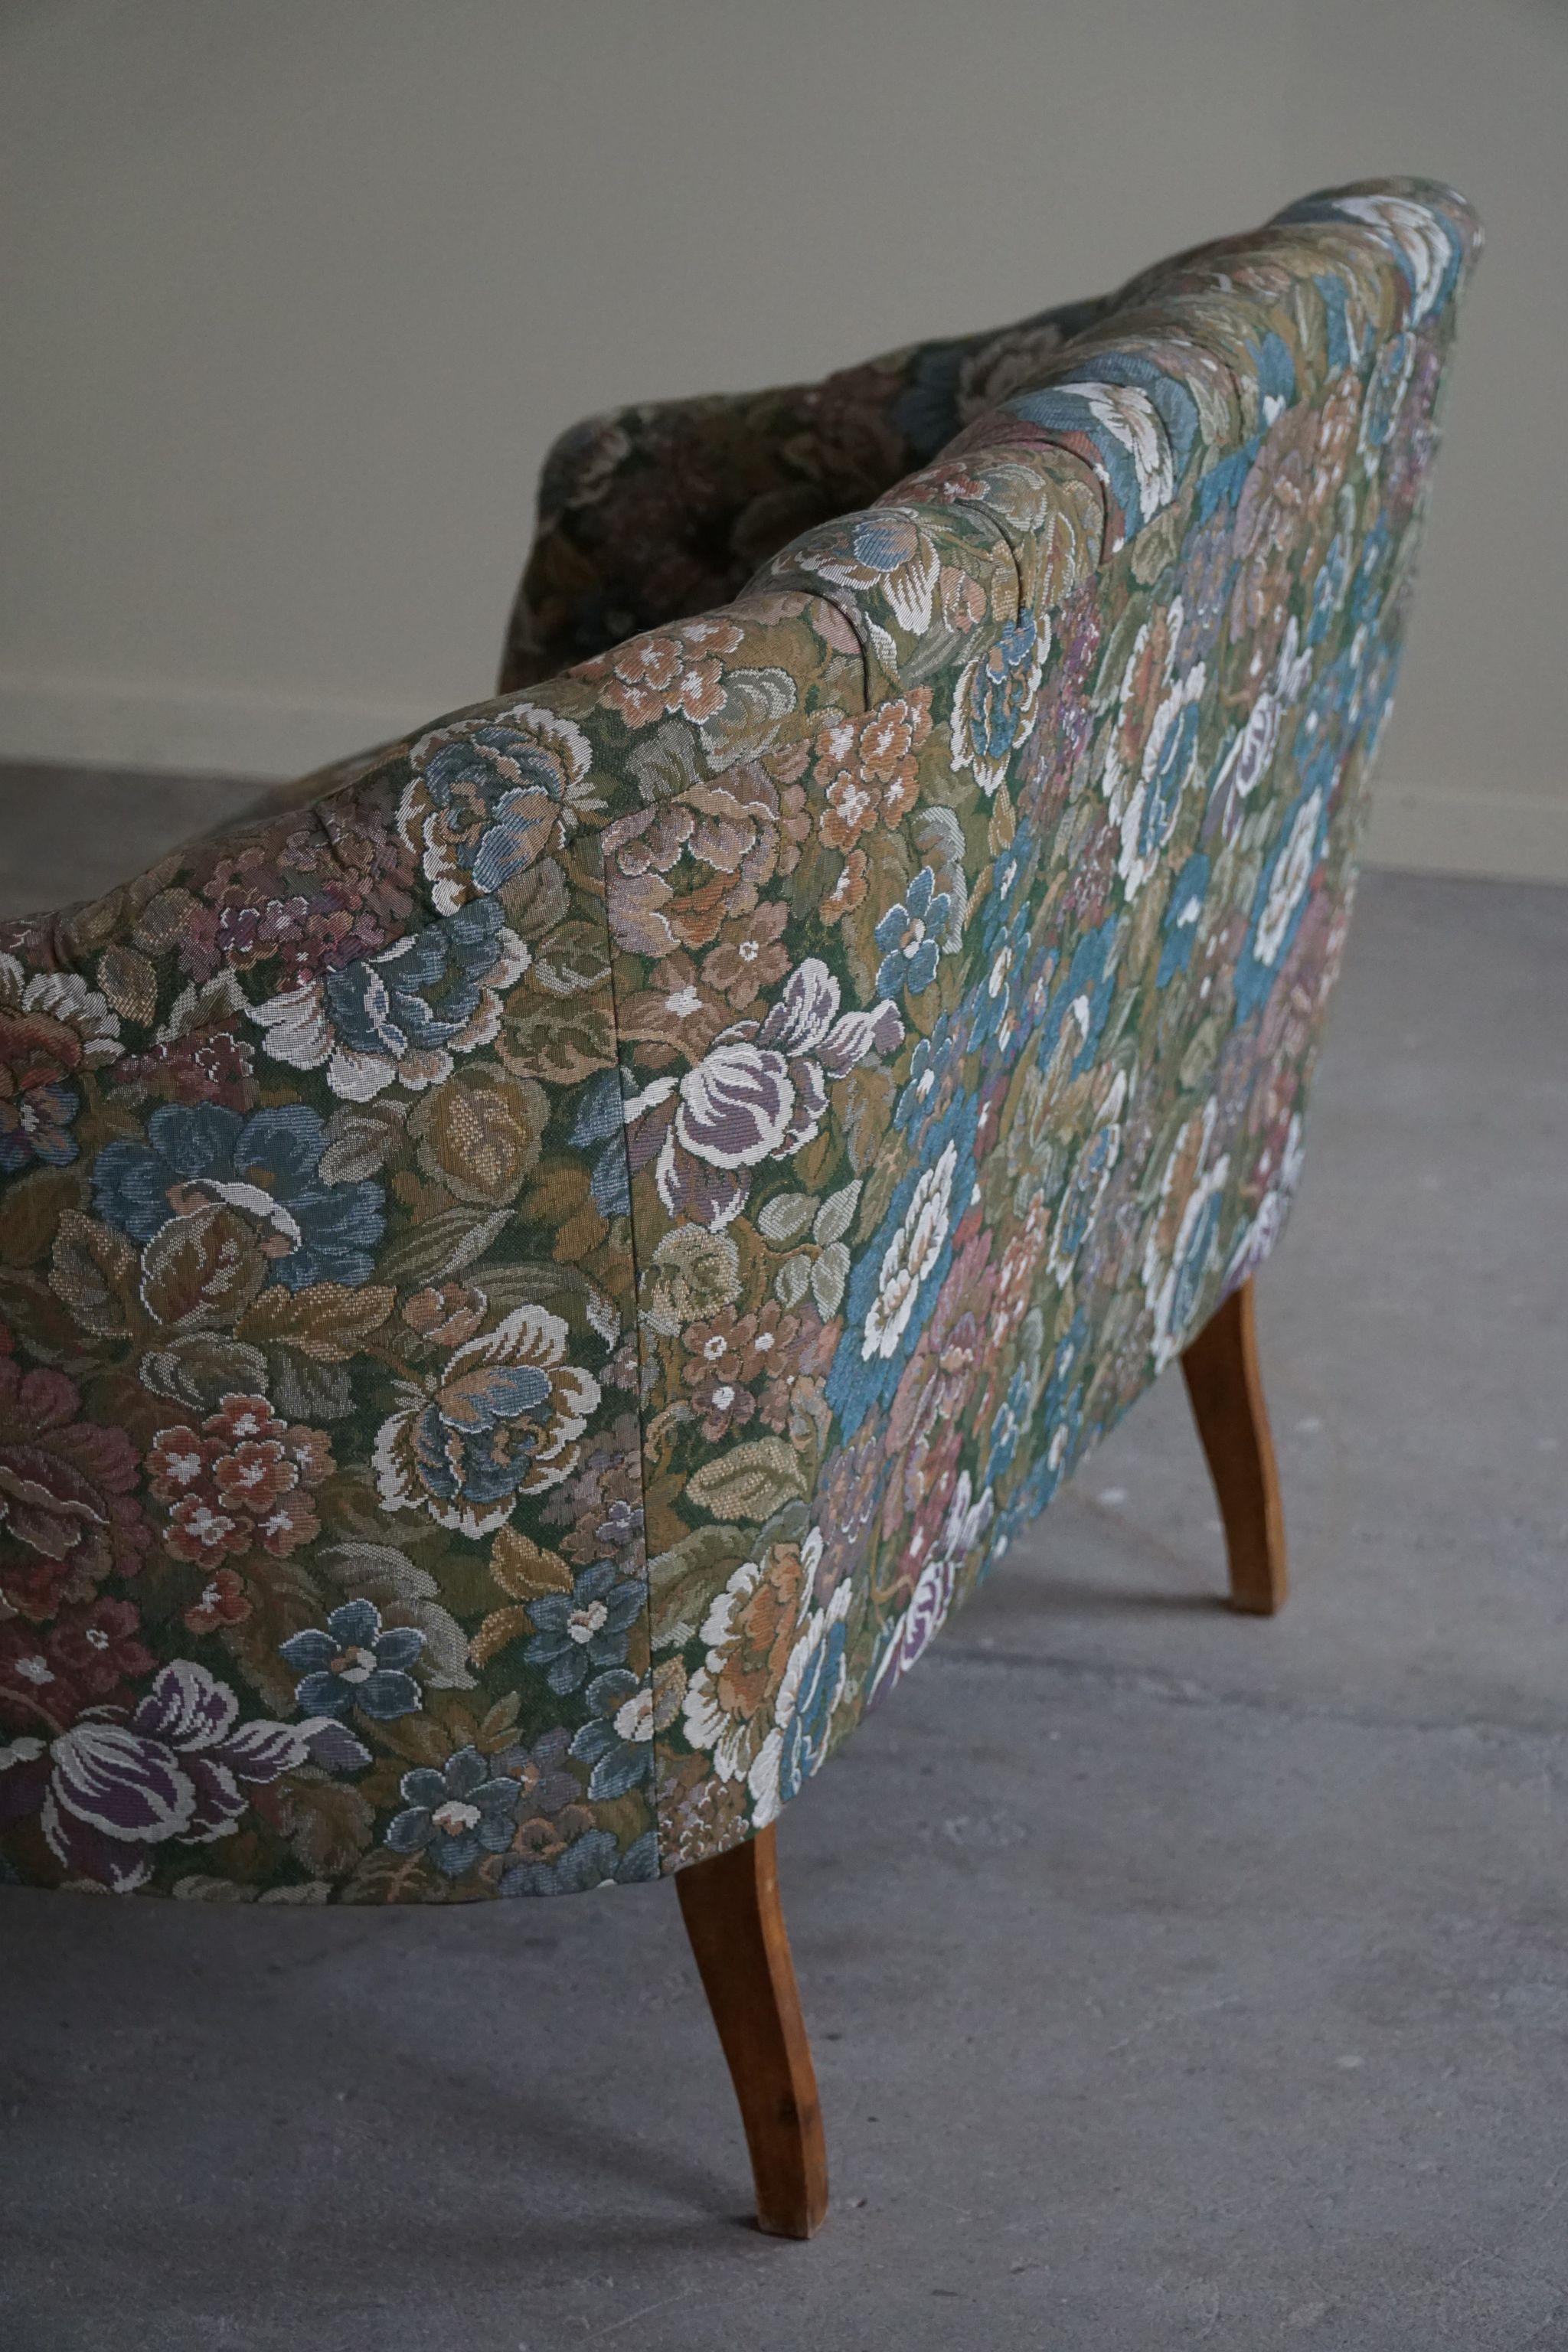 20th Century Antique Curved Sofa with Flora Fabric, By a Danish Cabinetmaker, Early 1900s